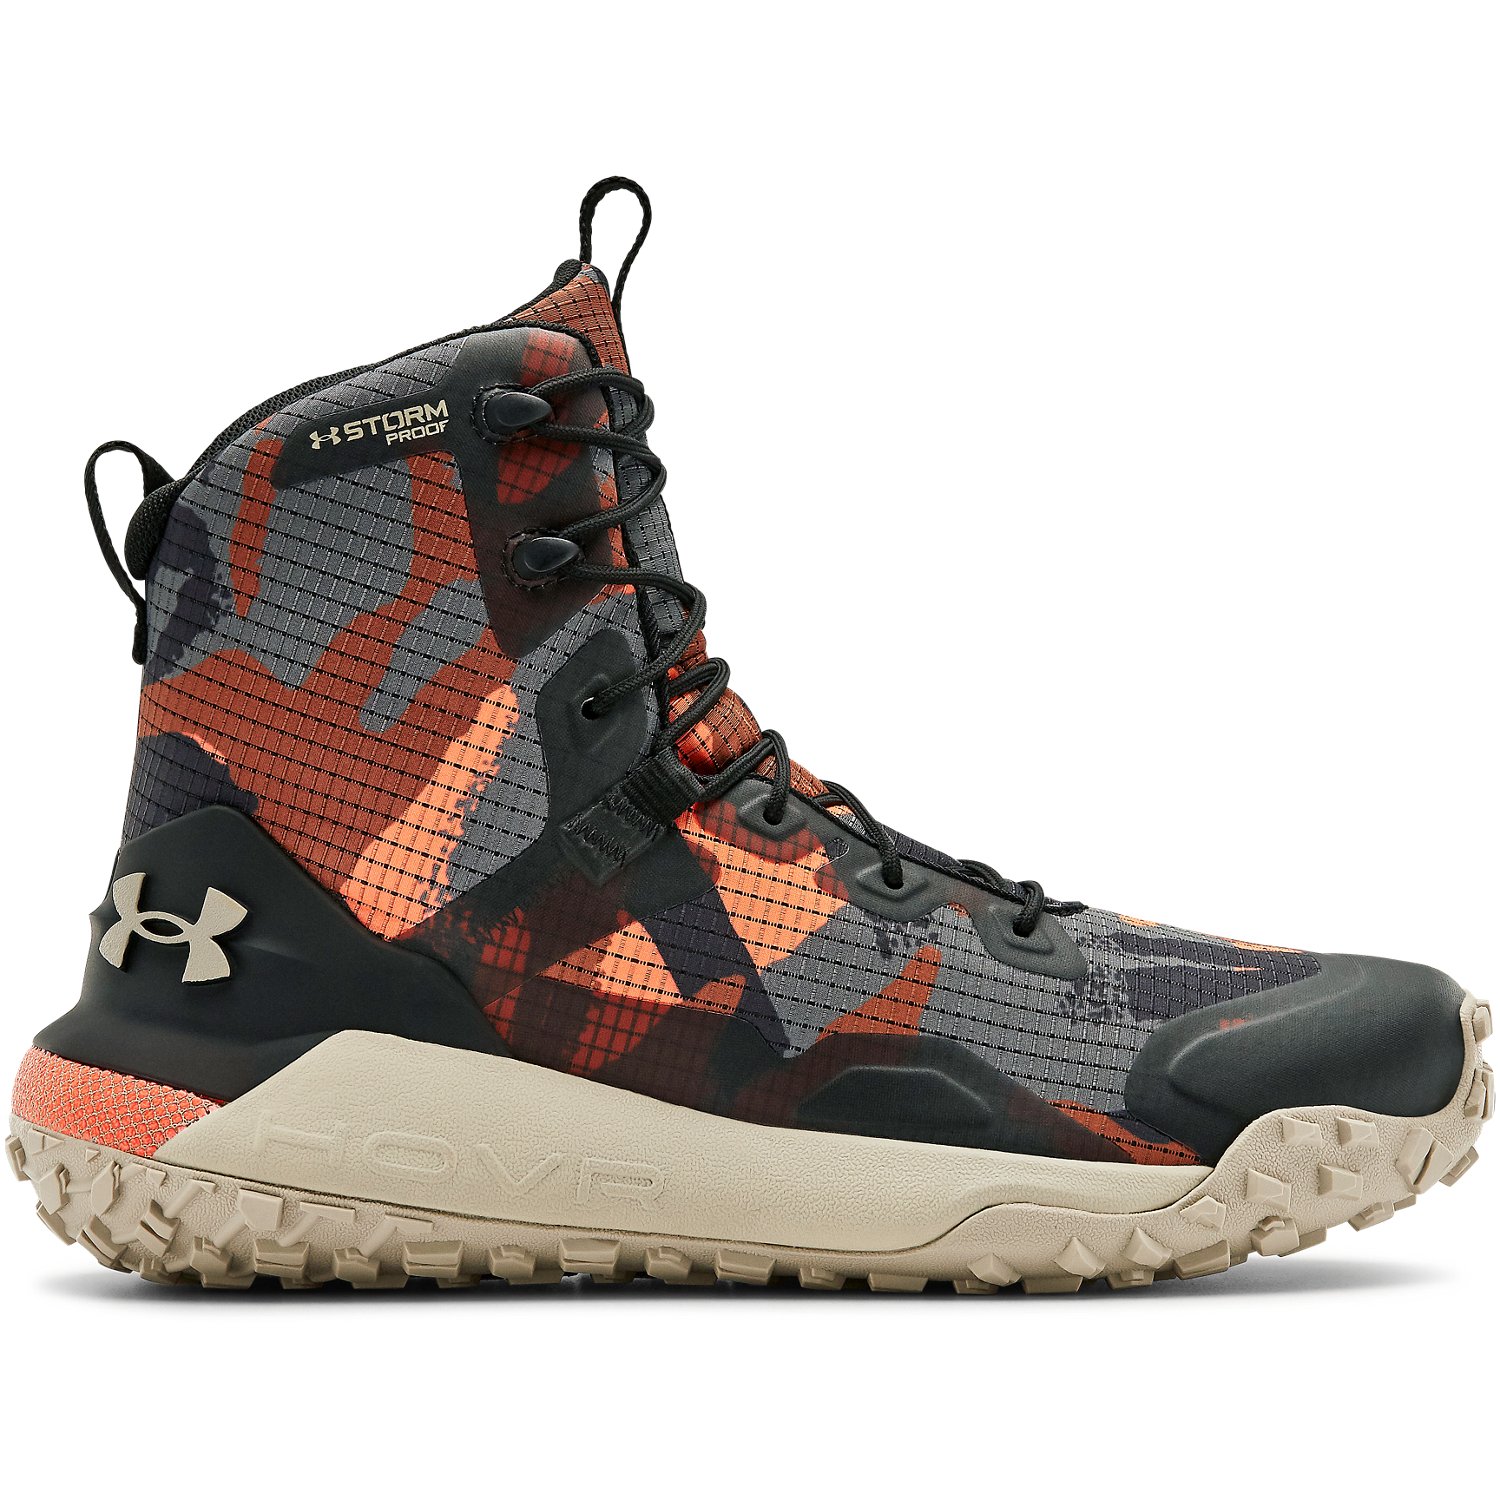 Under Armour - Unisex-Adult Hovr Dawn Wp Grid Speed Boots